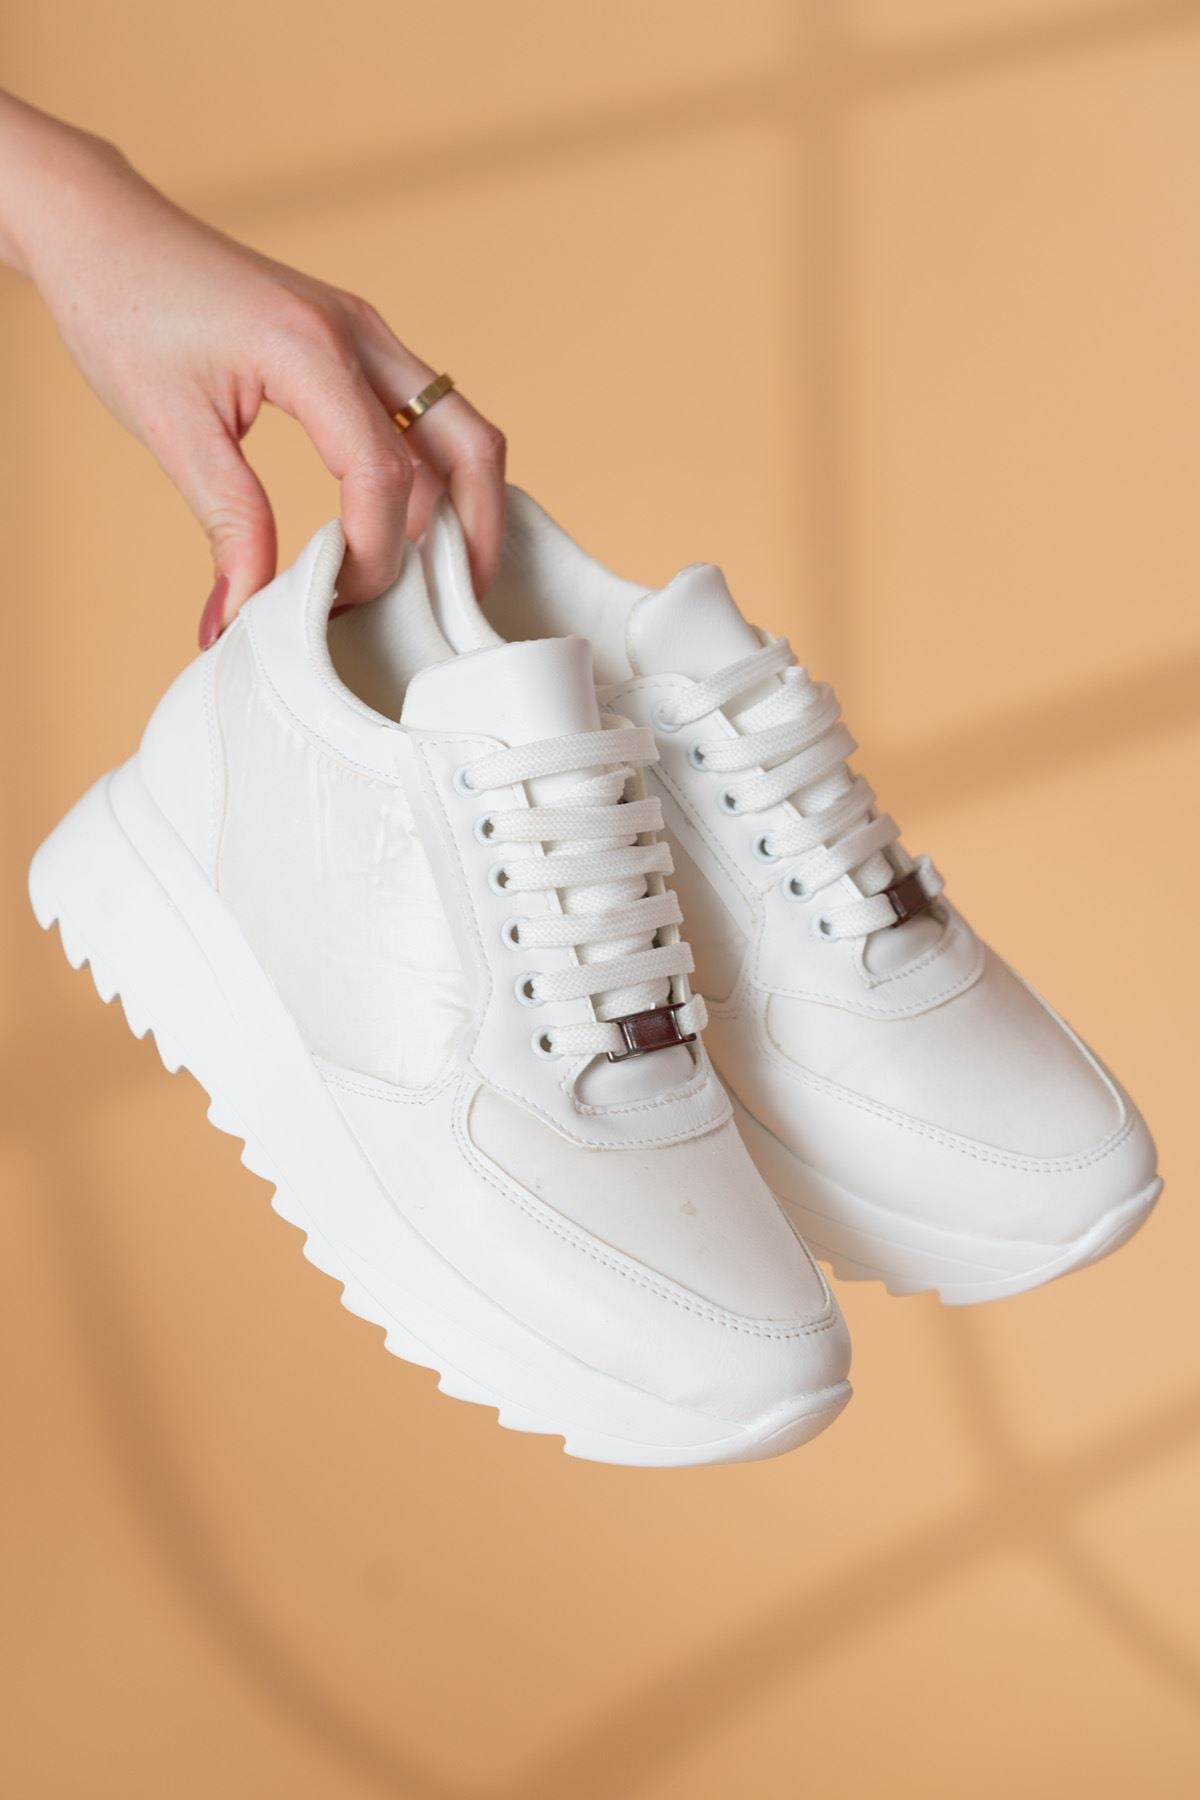 Letor Women's White Matte Leather - Parachute Sneakers shoes - STREETMODE ™